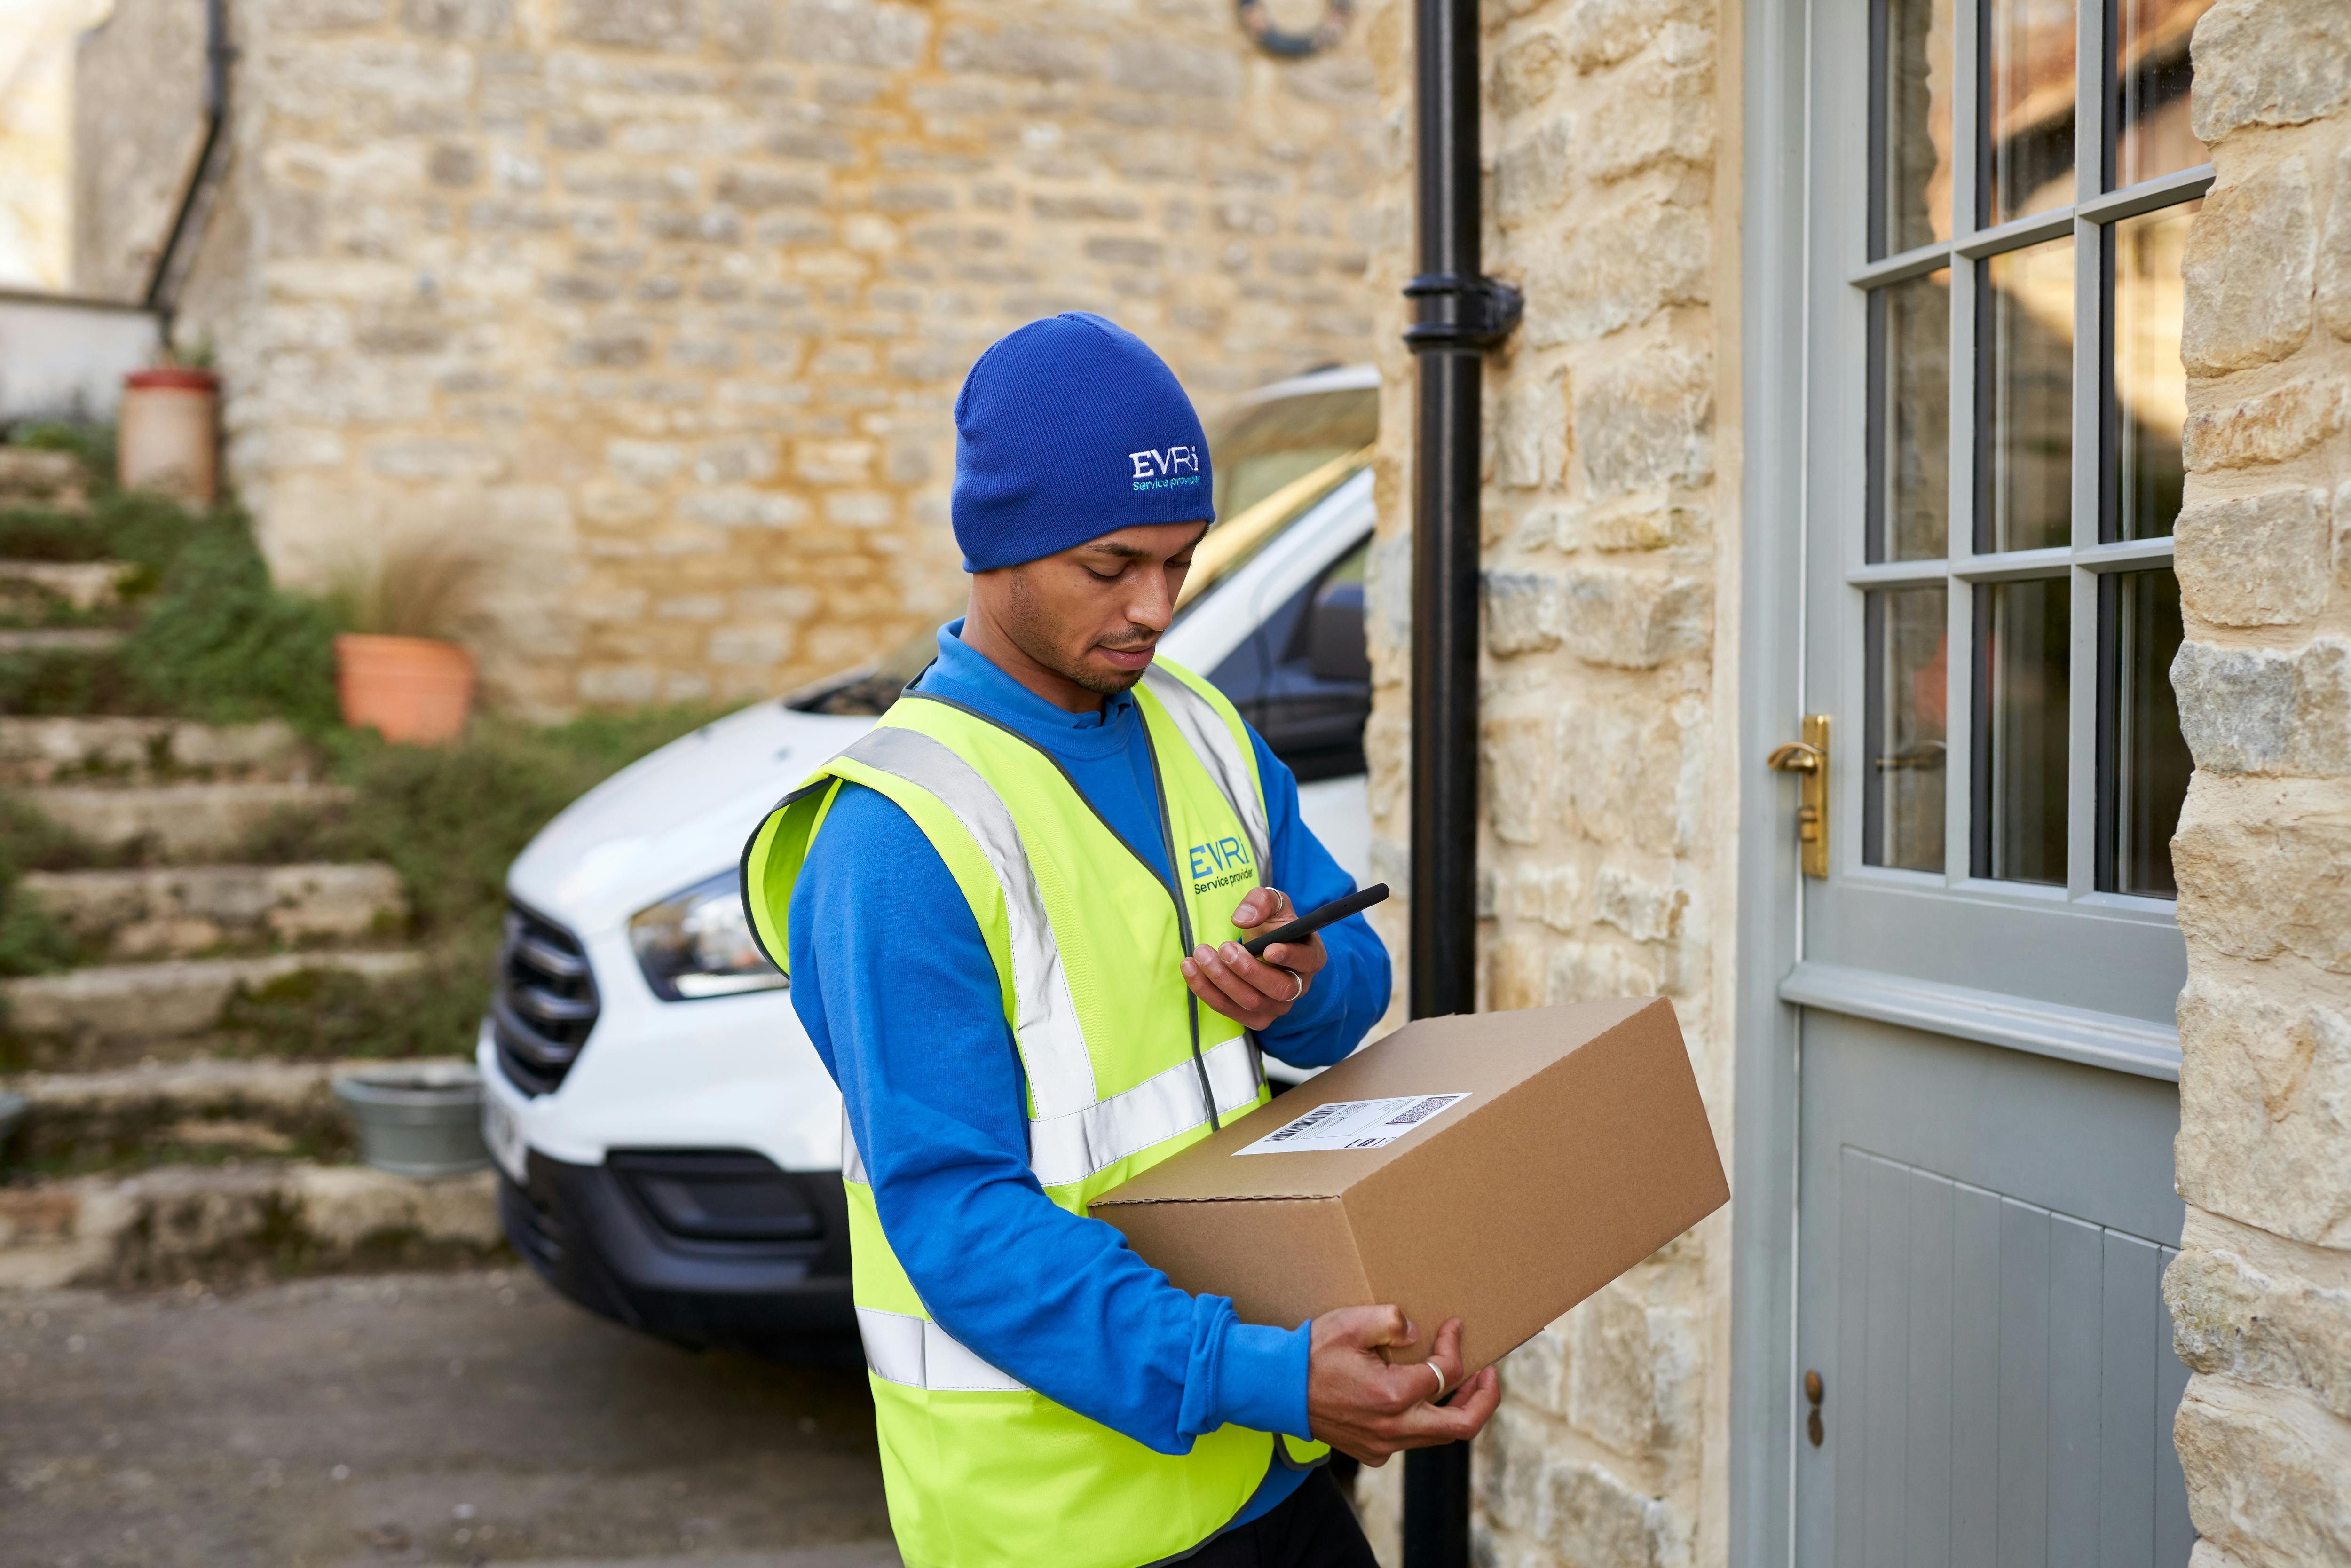 courier holding parcel on doorstep and scanning on smartphone